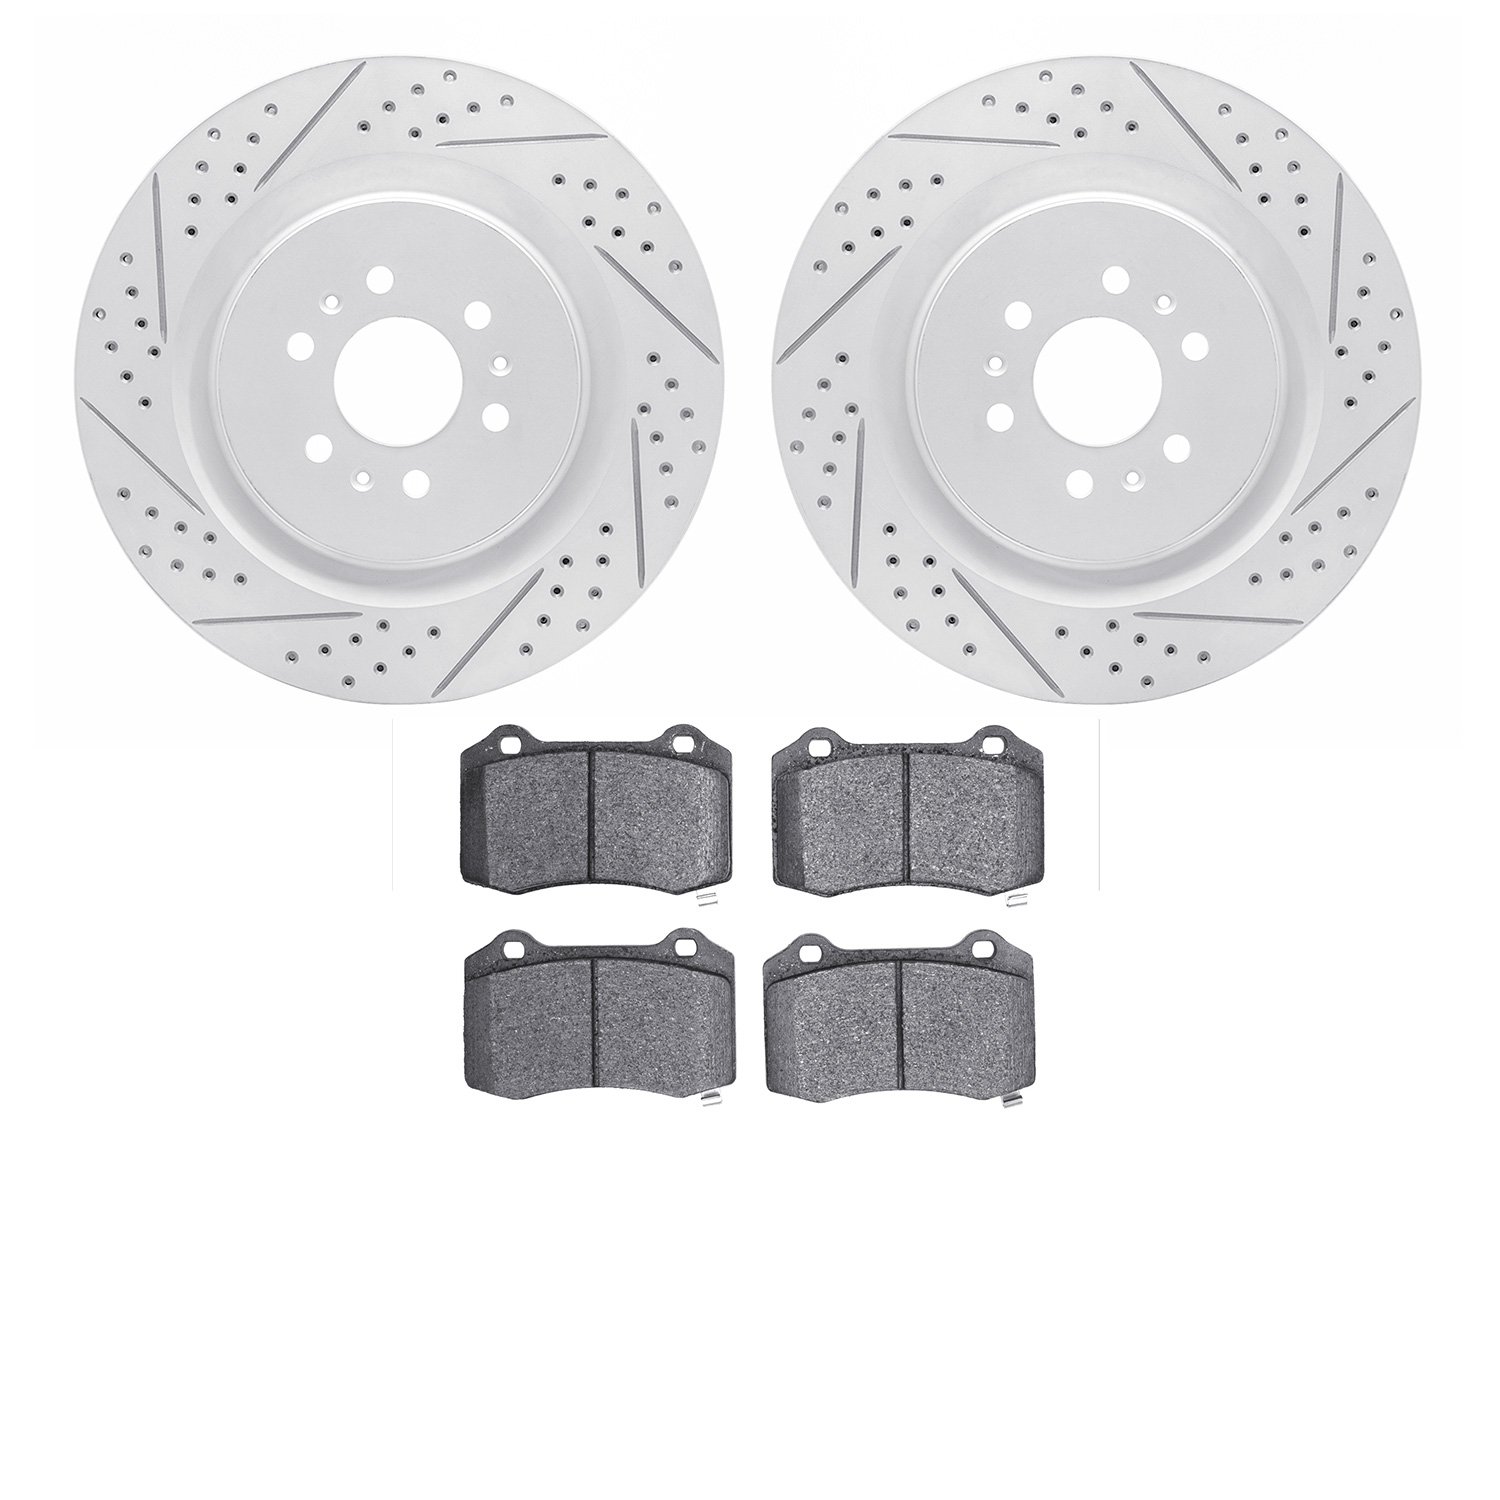 2402-46001 Geoperformance Drilled/Slotted Brake Rotors with Ultimate-Duty Brake Pads Kit, 2004-2011 GM, Position: Rear